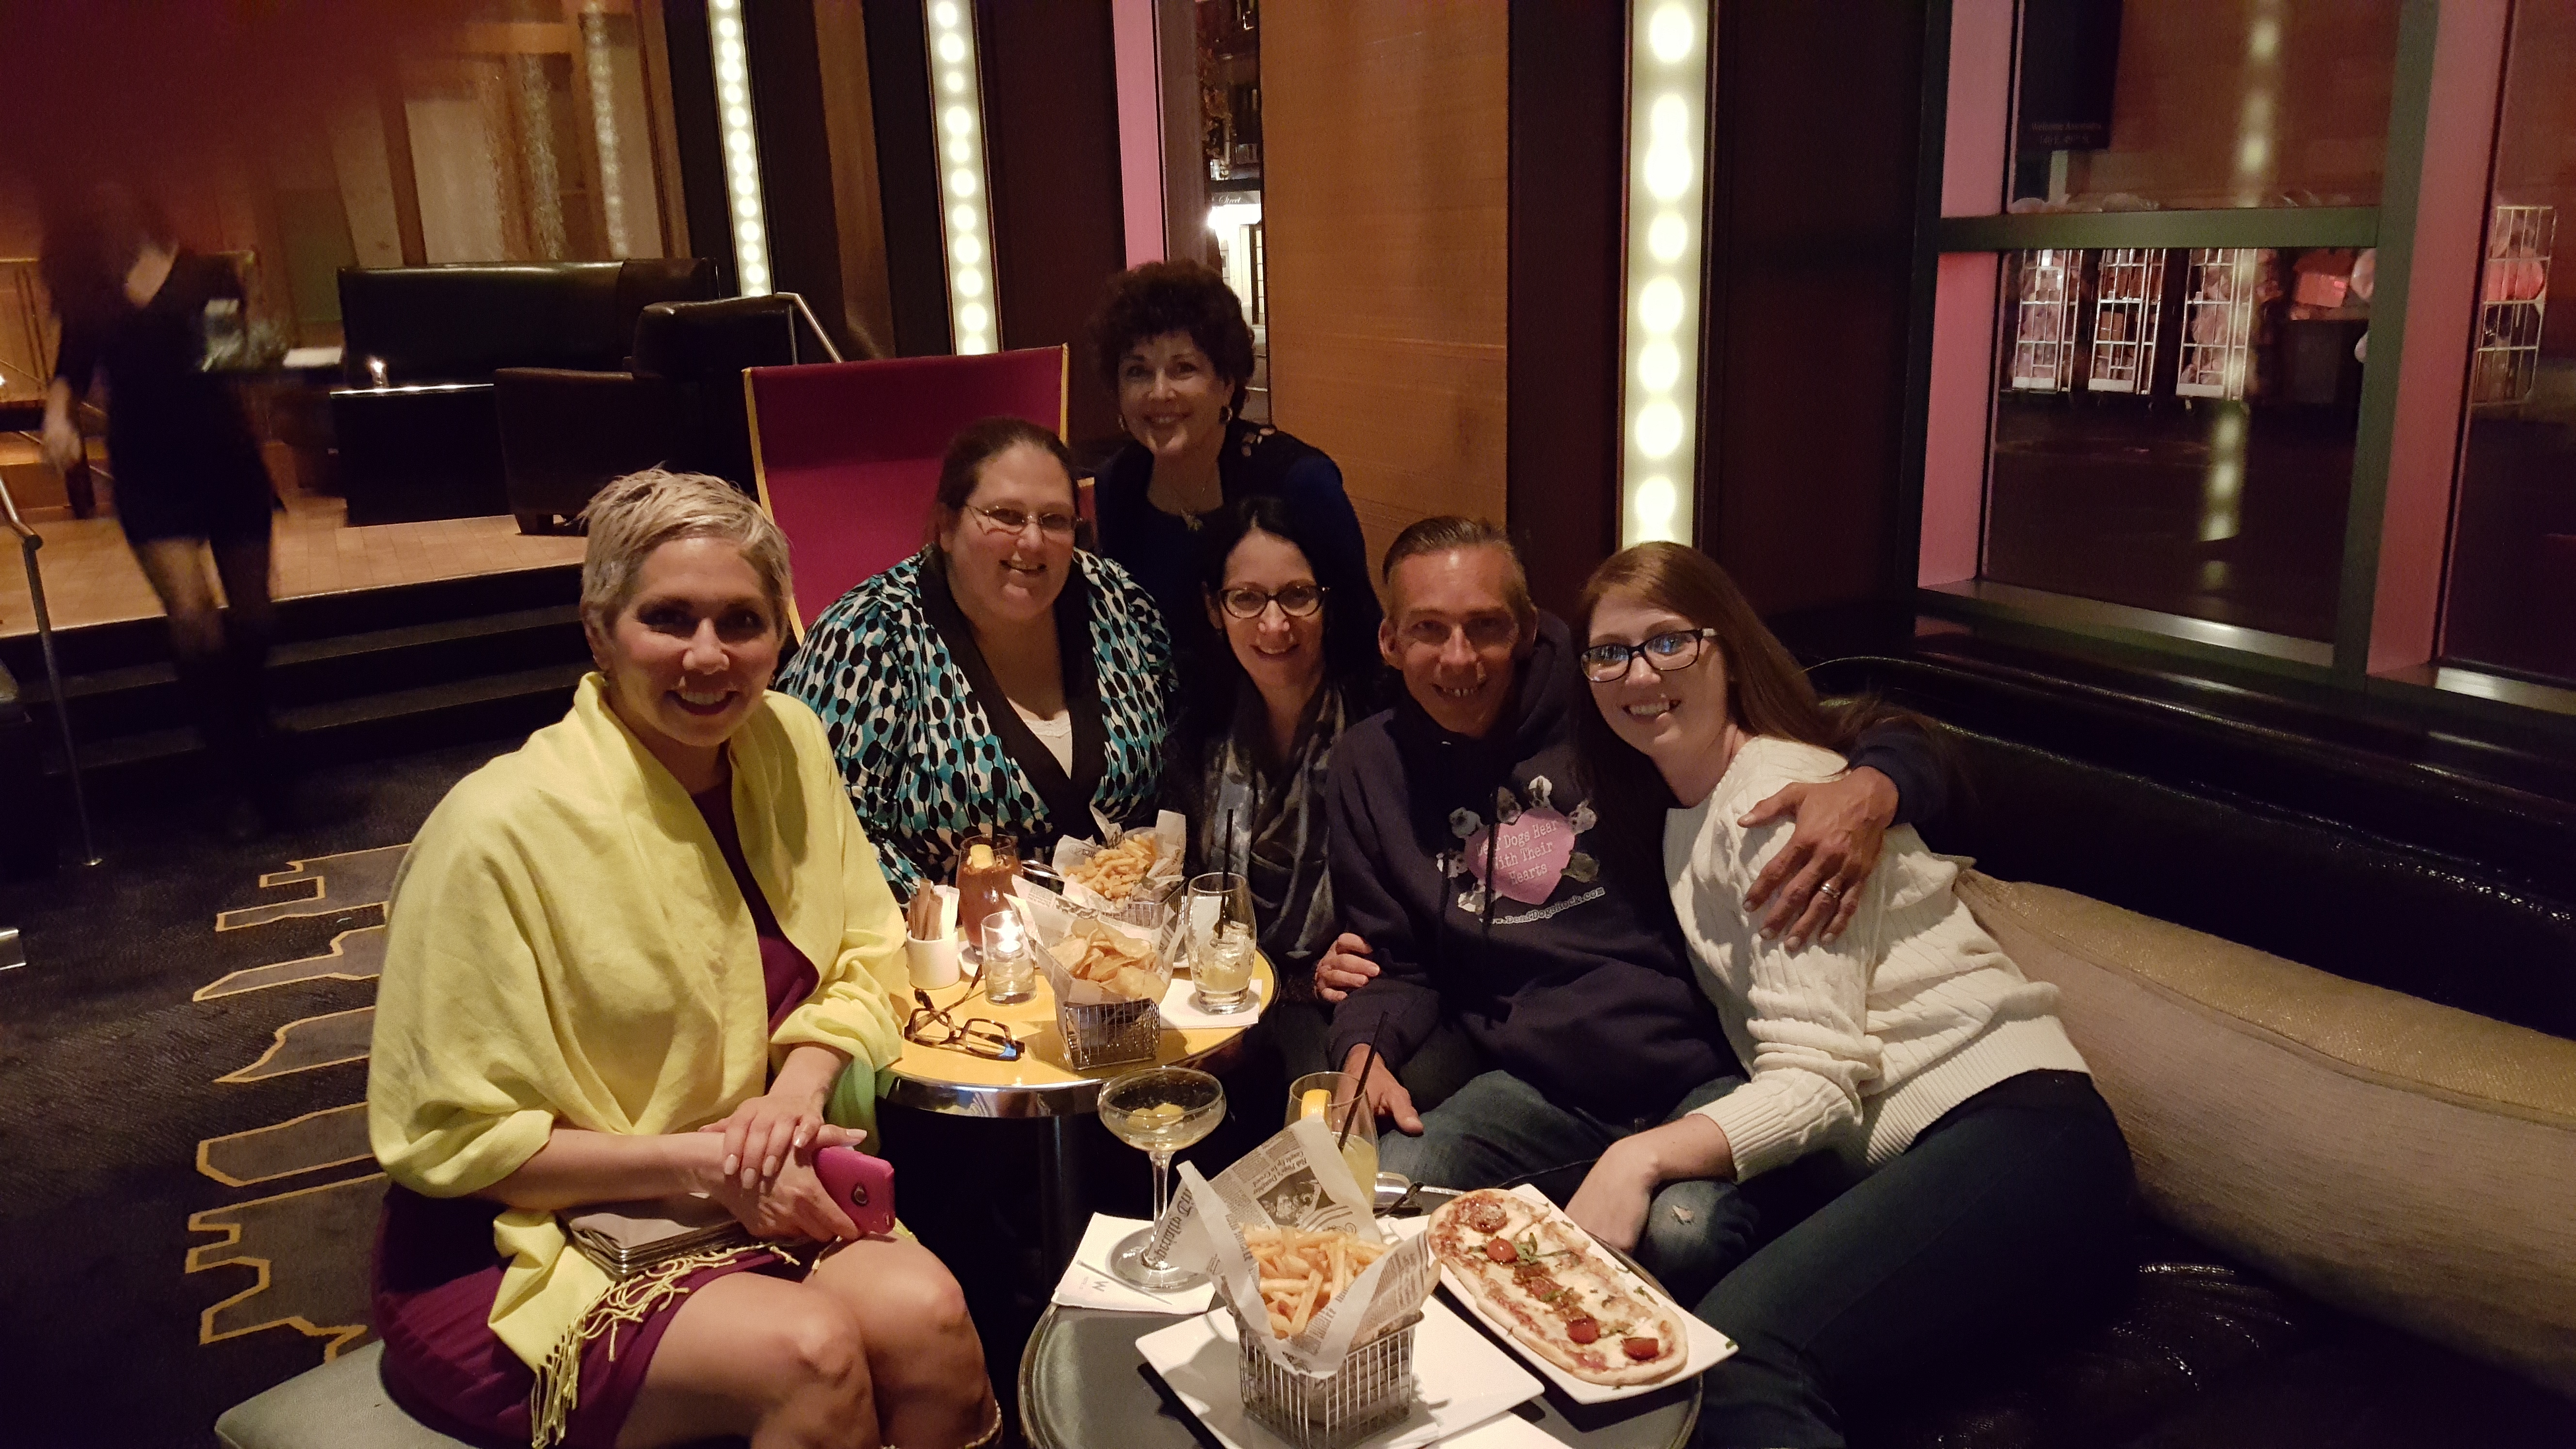 Me and my blogging friends at The W Hotel in NYC!